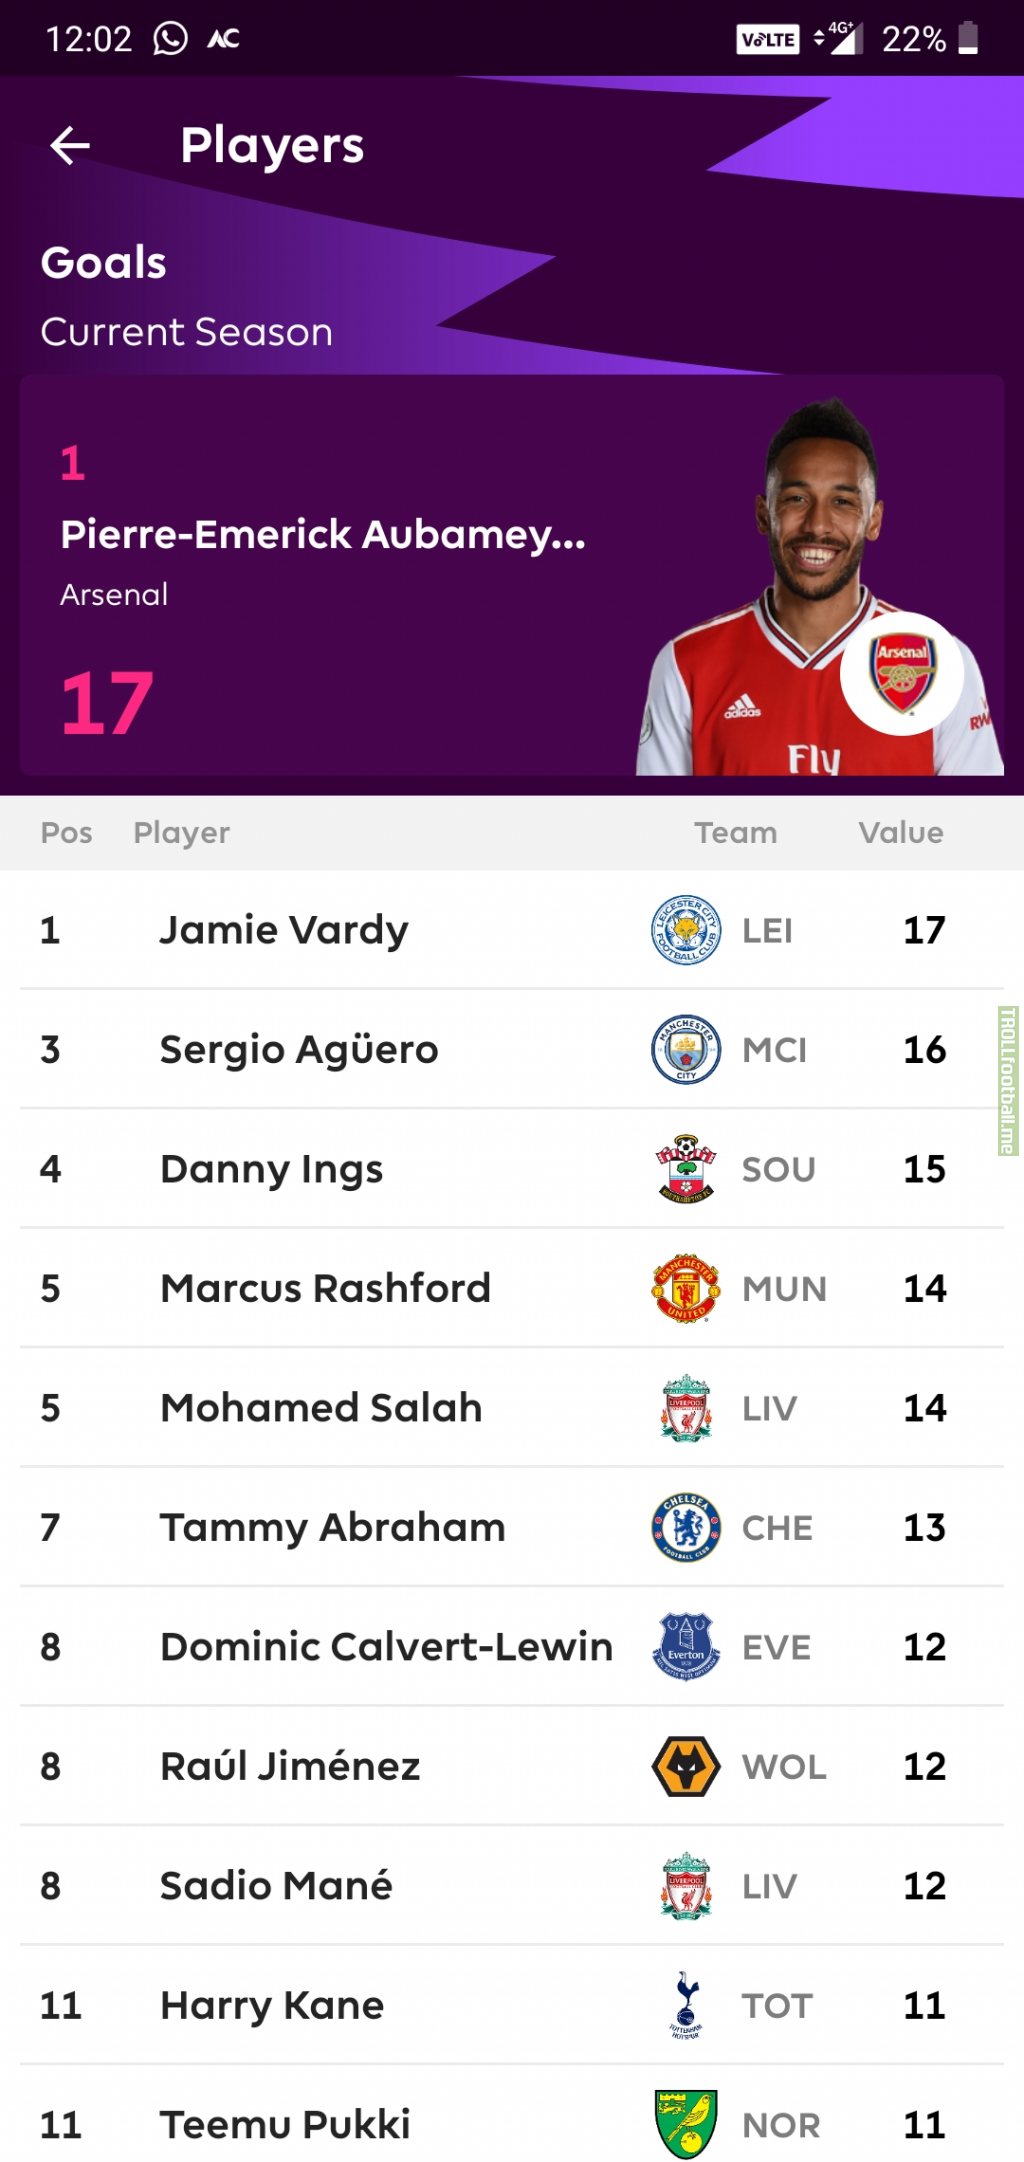 Race for the golden boot 2019-2020. Aubameyang and Vardy tied on goals at 1st.